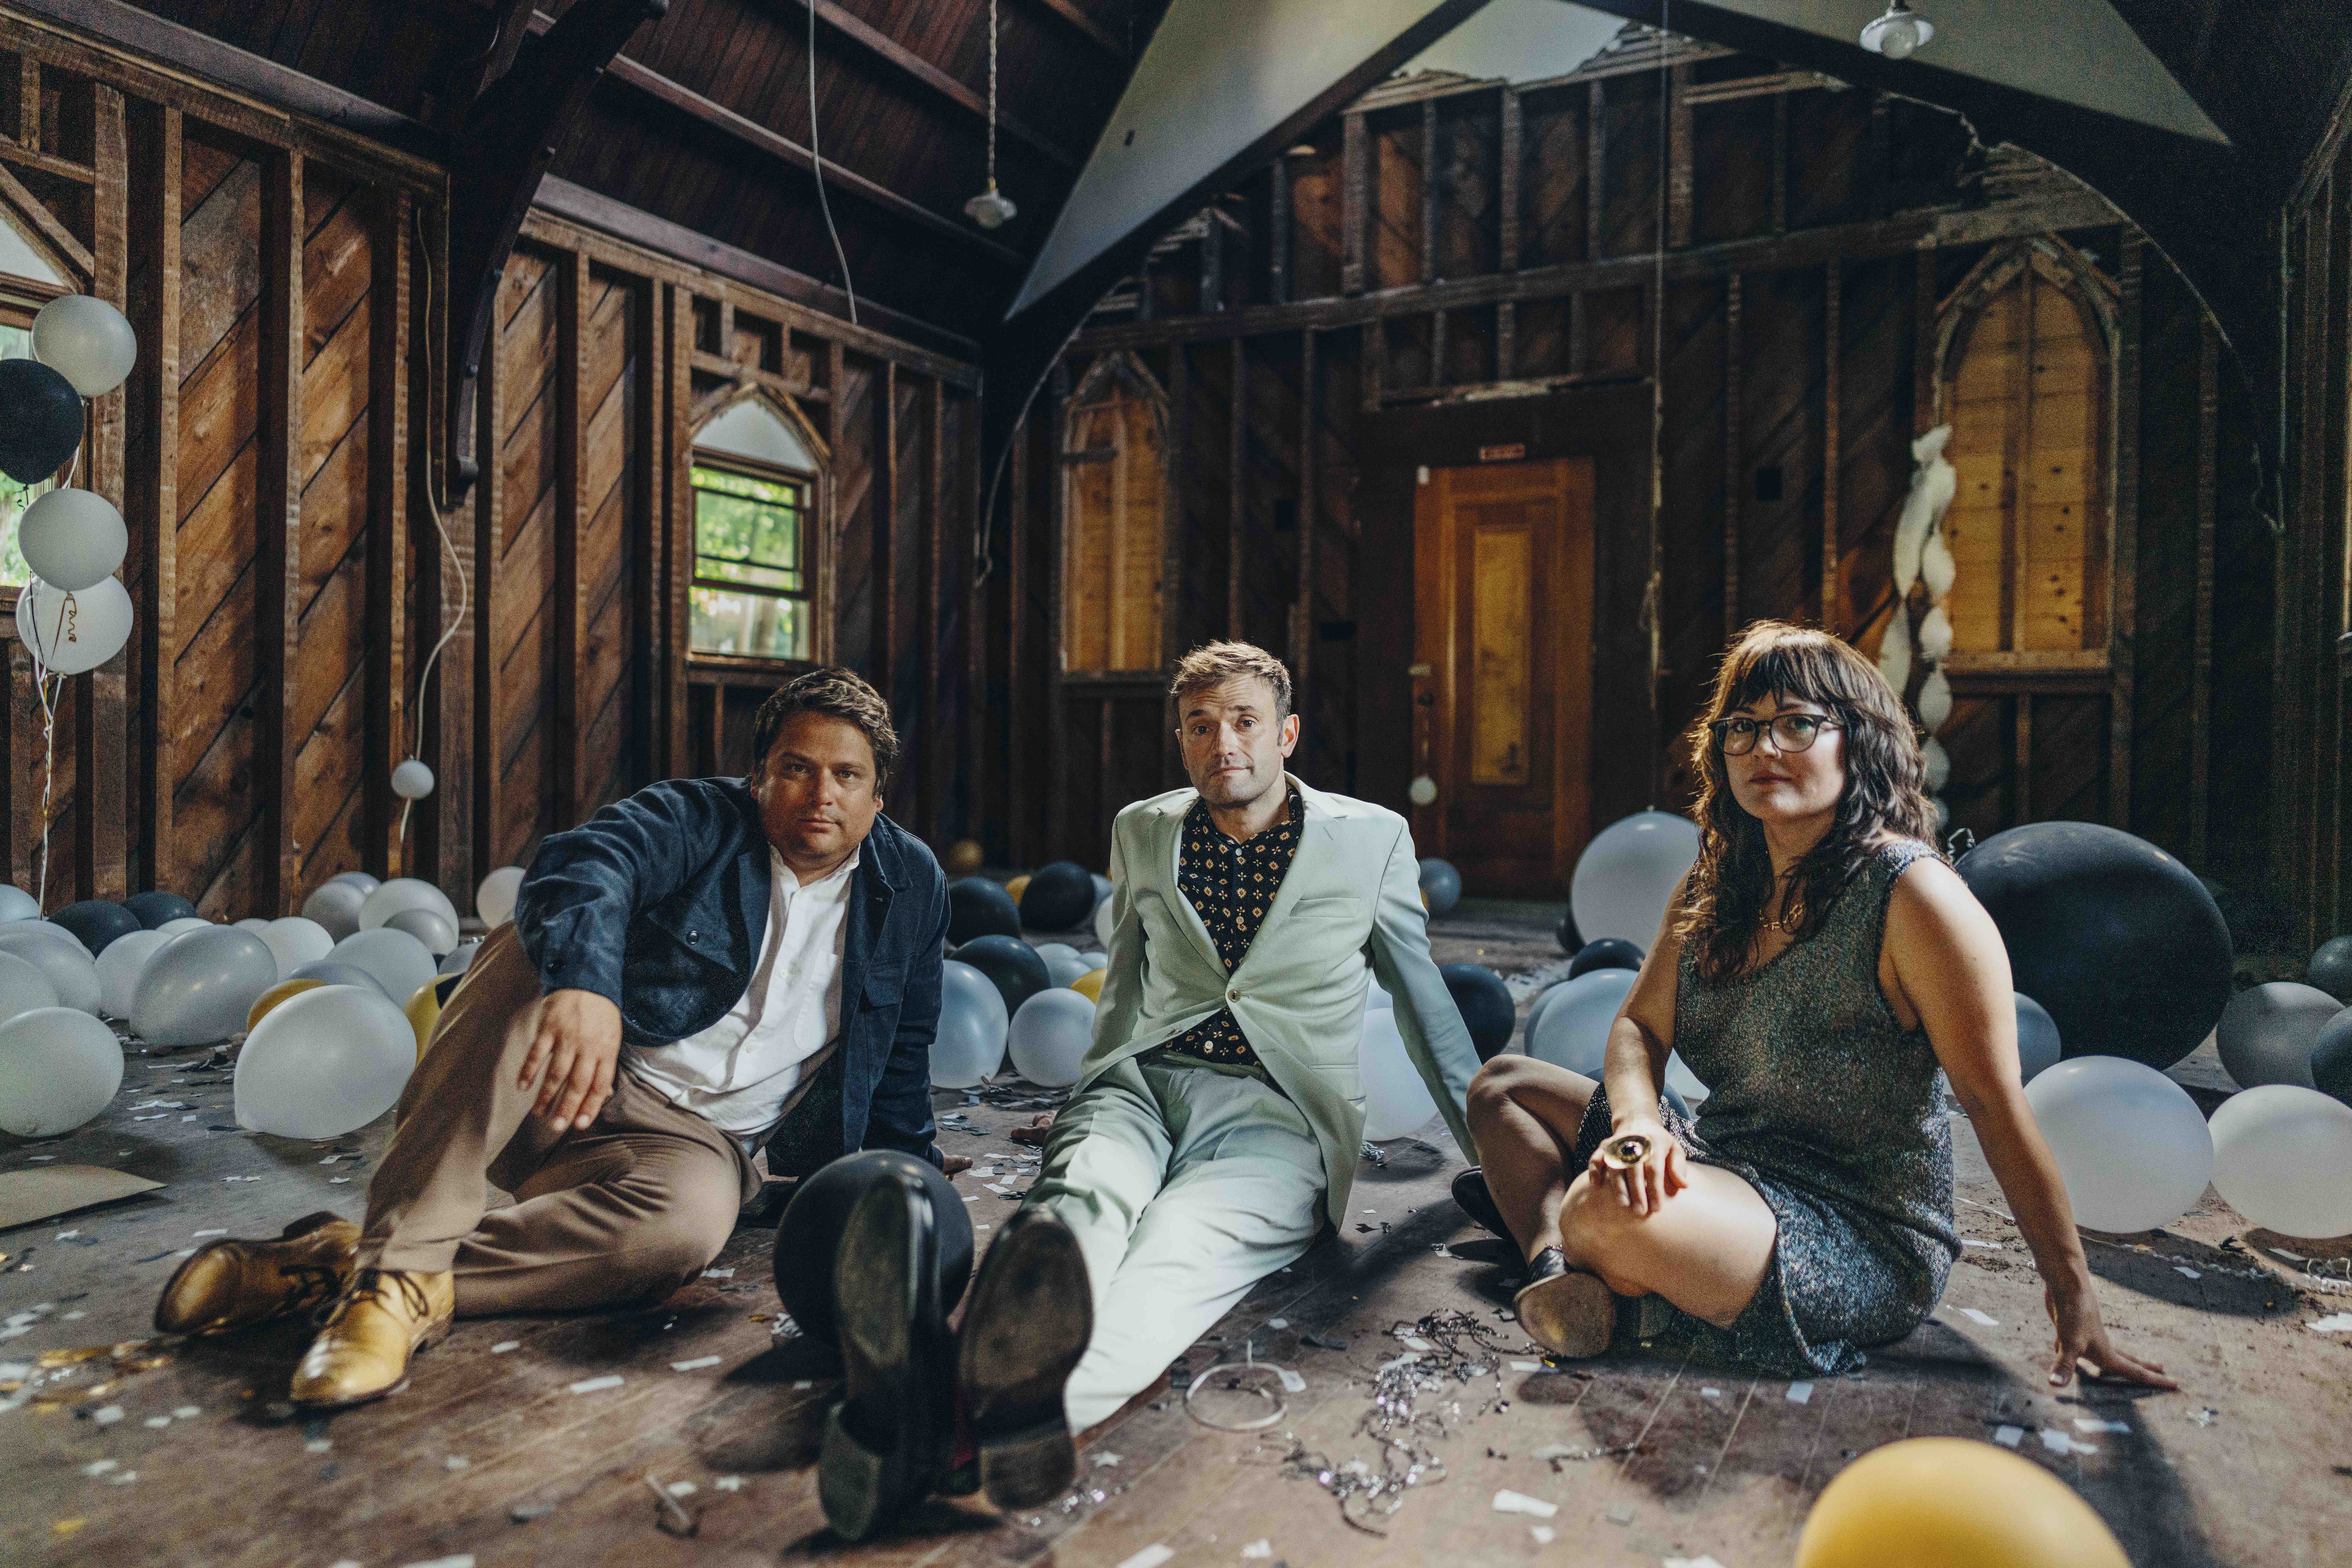 In an abandoned building with exposed wood framing, there are white and black balloons scattered on the floor. In the center, three people (those apart of Nickel Creek) sit next to one another.